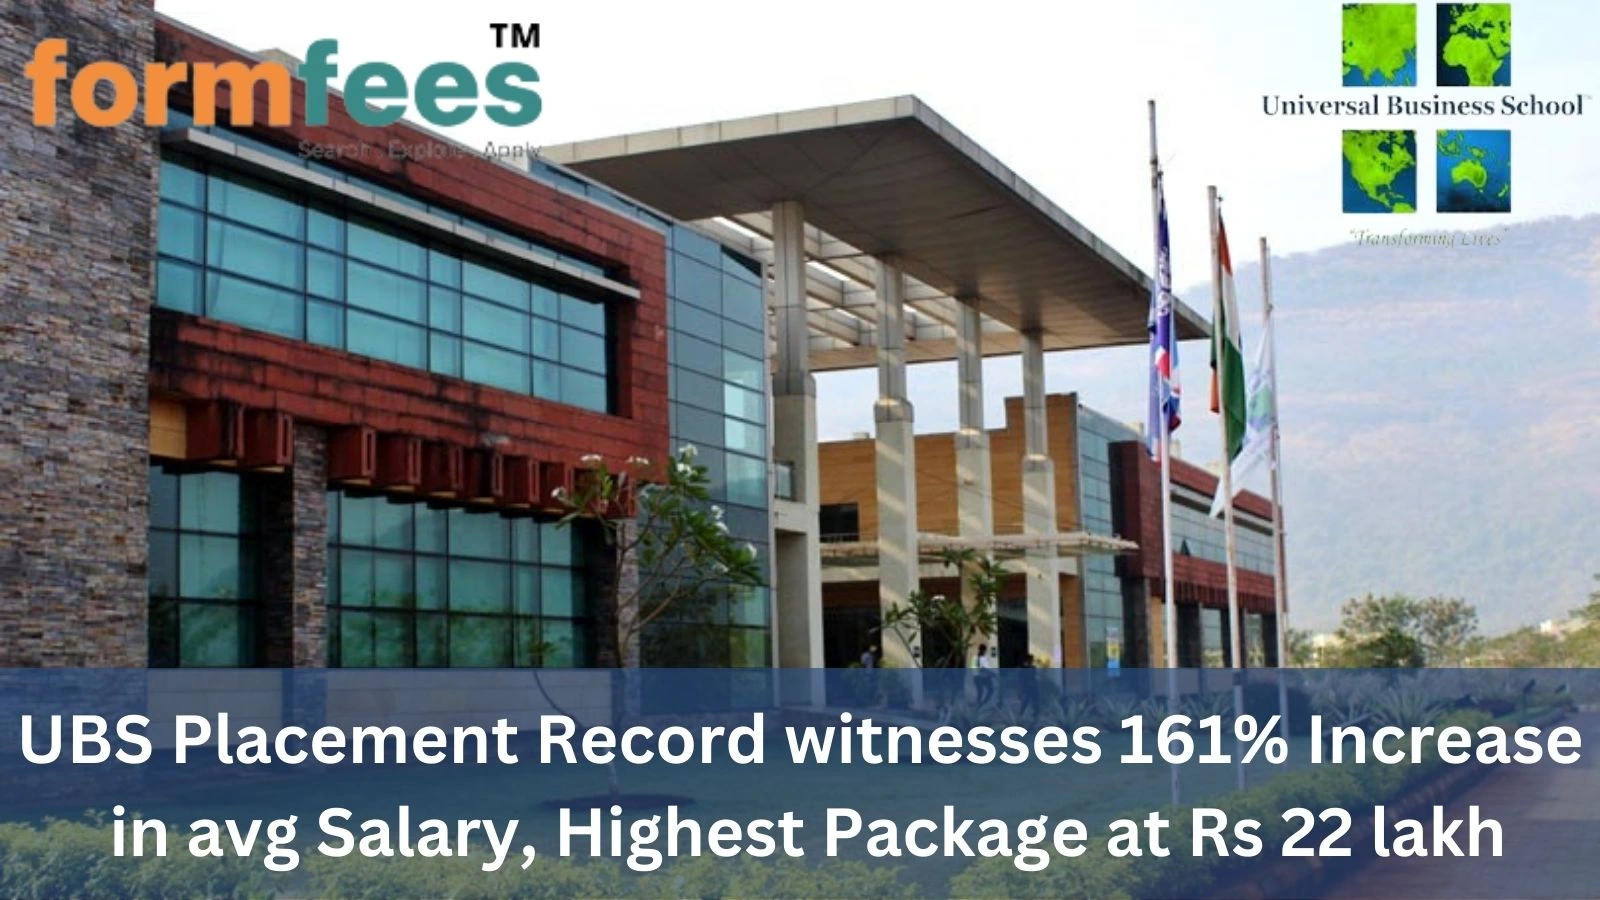 UBS Placement Record witnesses 161% Increase in avg Salary, Highest Package at Rs 22 lakh